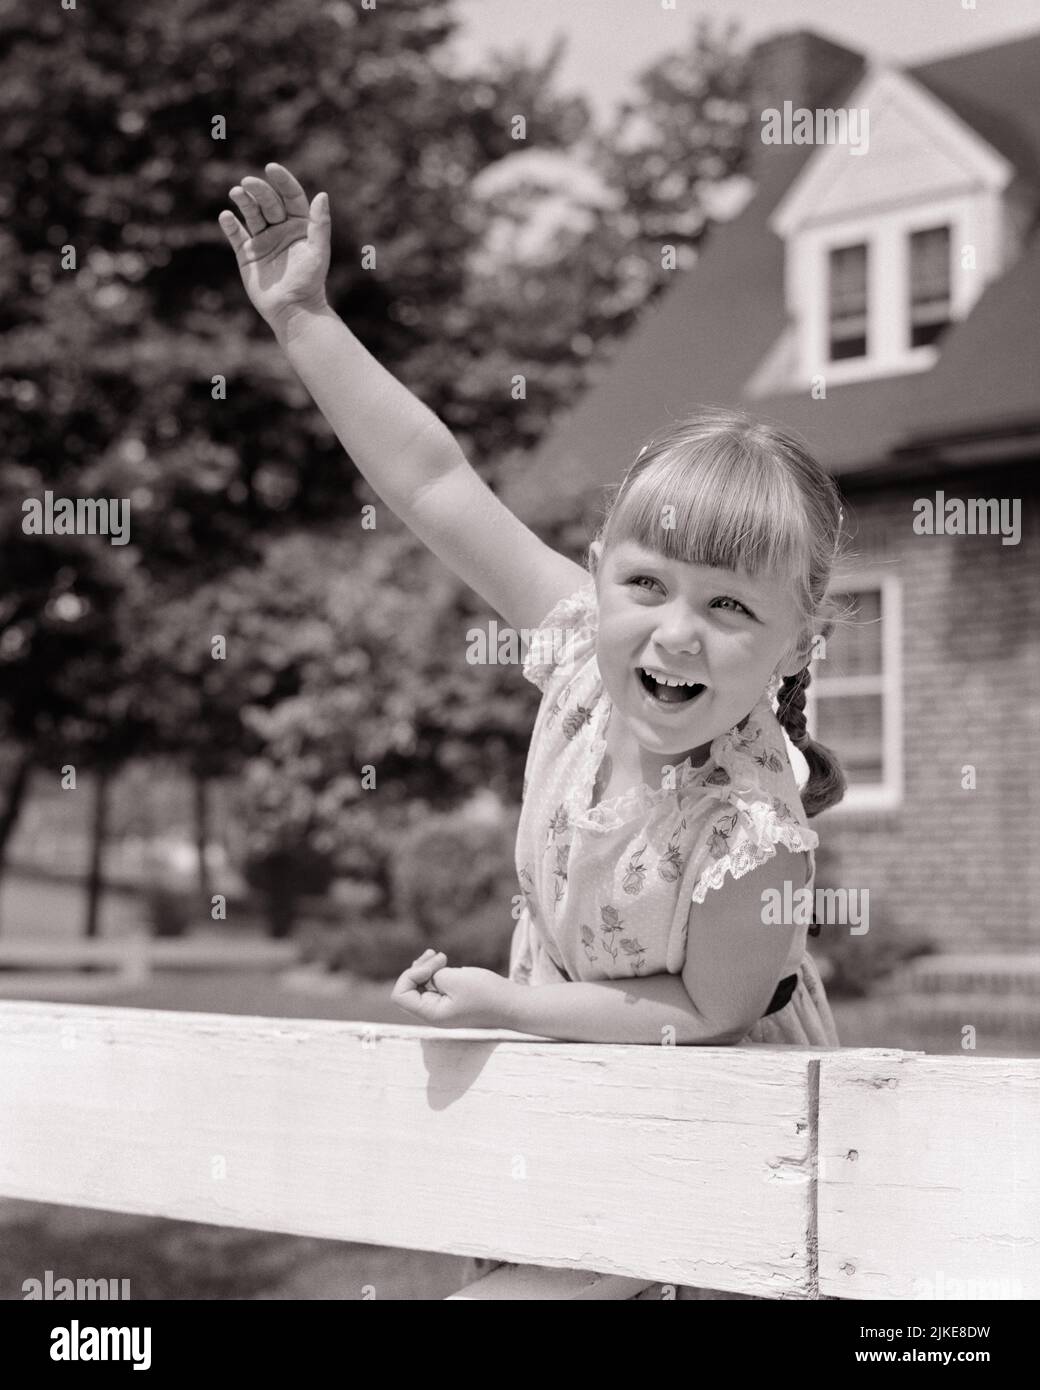 1950s 1960s EXCITED SMILING LITTLE GIRL WITH BANGS LEANING ON FENCE AND WAVING WITH RAISED ARM - j7590 HAR001 HARS LIFESTYLE SATISFACTION FEMALES HOUSES RURAL HEALTHINESS HOME LIFE COPY SPACE FRIENDSHIP HALF-LENGTH INSPIRATION RESIDENTIAL BUILDINGS GESTURING B&W SUMMERTIME EYE CONTACT HAPPINESS CHEERFUL HELLO AND EXCITEMENT EXTERIOR LOW ANGLE GESTURES HOMES SMILES CONCEPTUAL JOYFUL RESIDENCE GROWTH JUVENILES SEASON BANGS BLACK AND WHITE CAUCASIAN ETHNICITY HAR001 OLD FASHIONED Stock Photo